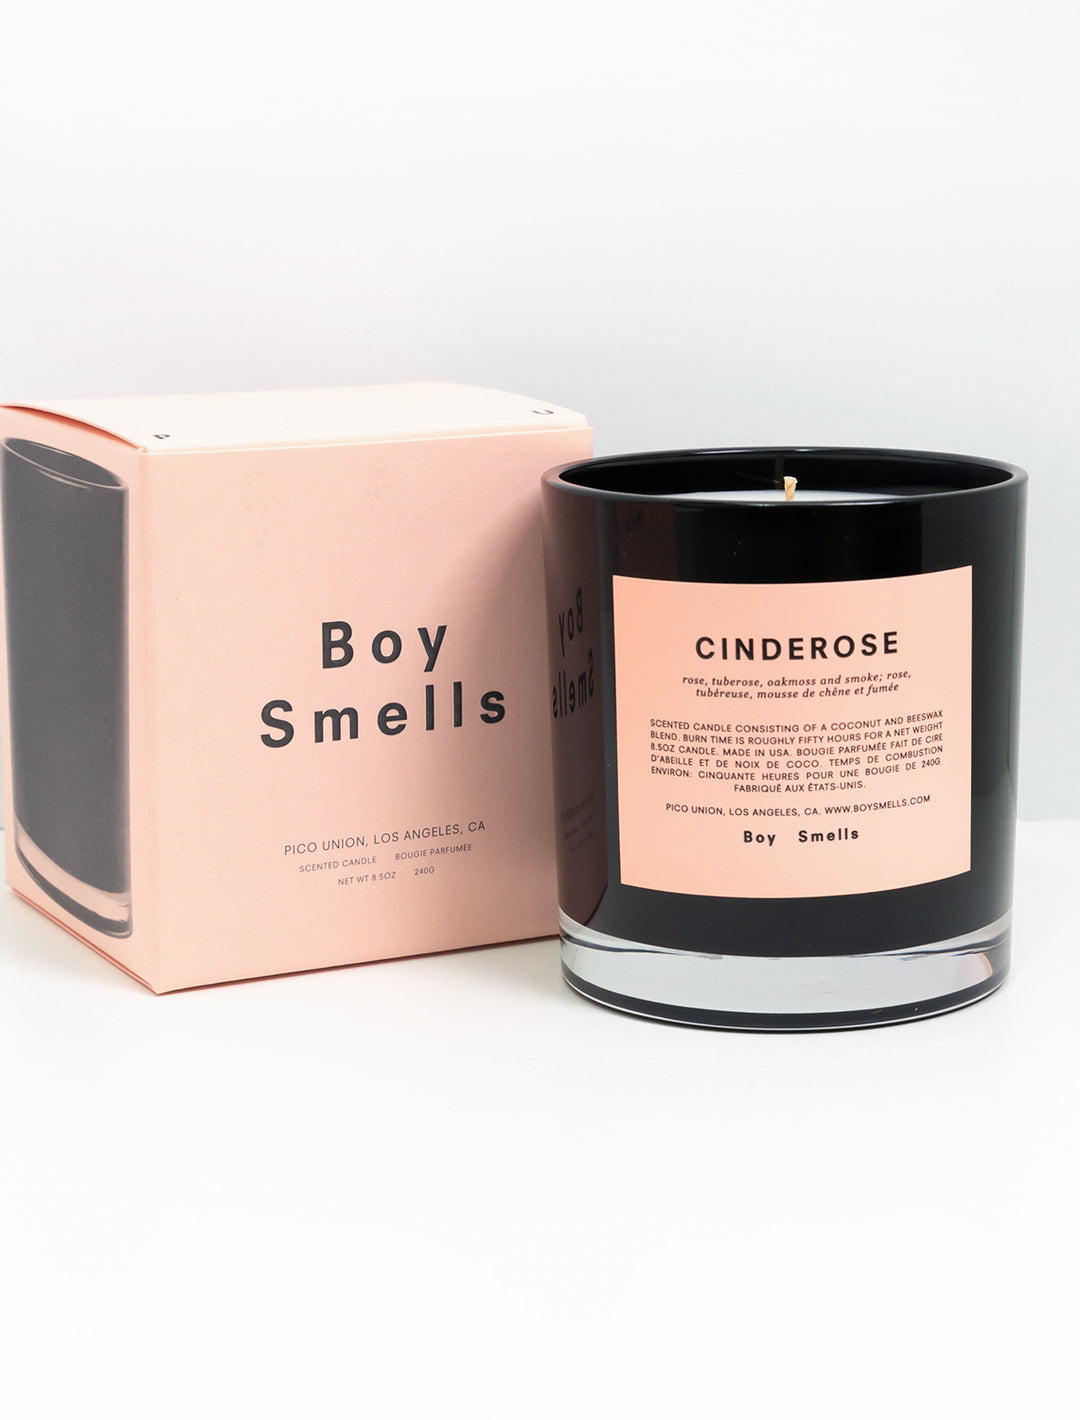 Product packaging of Boy Smells' Cinderose candle.